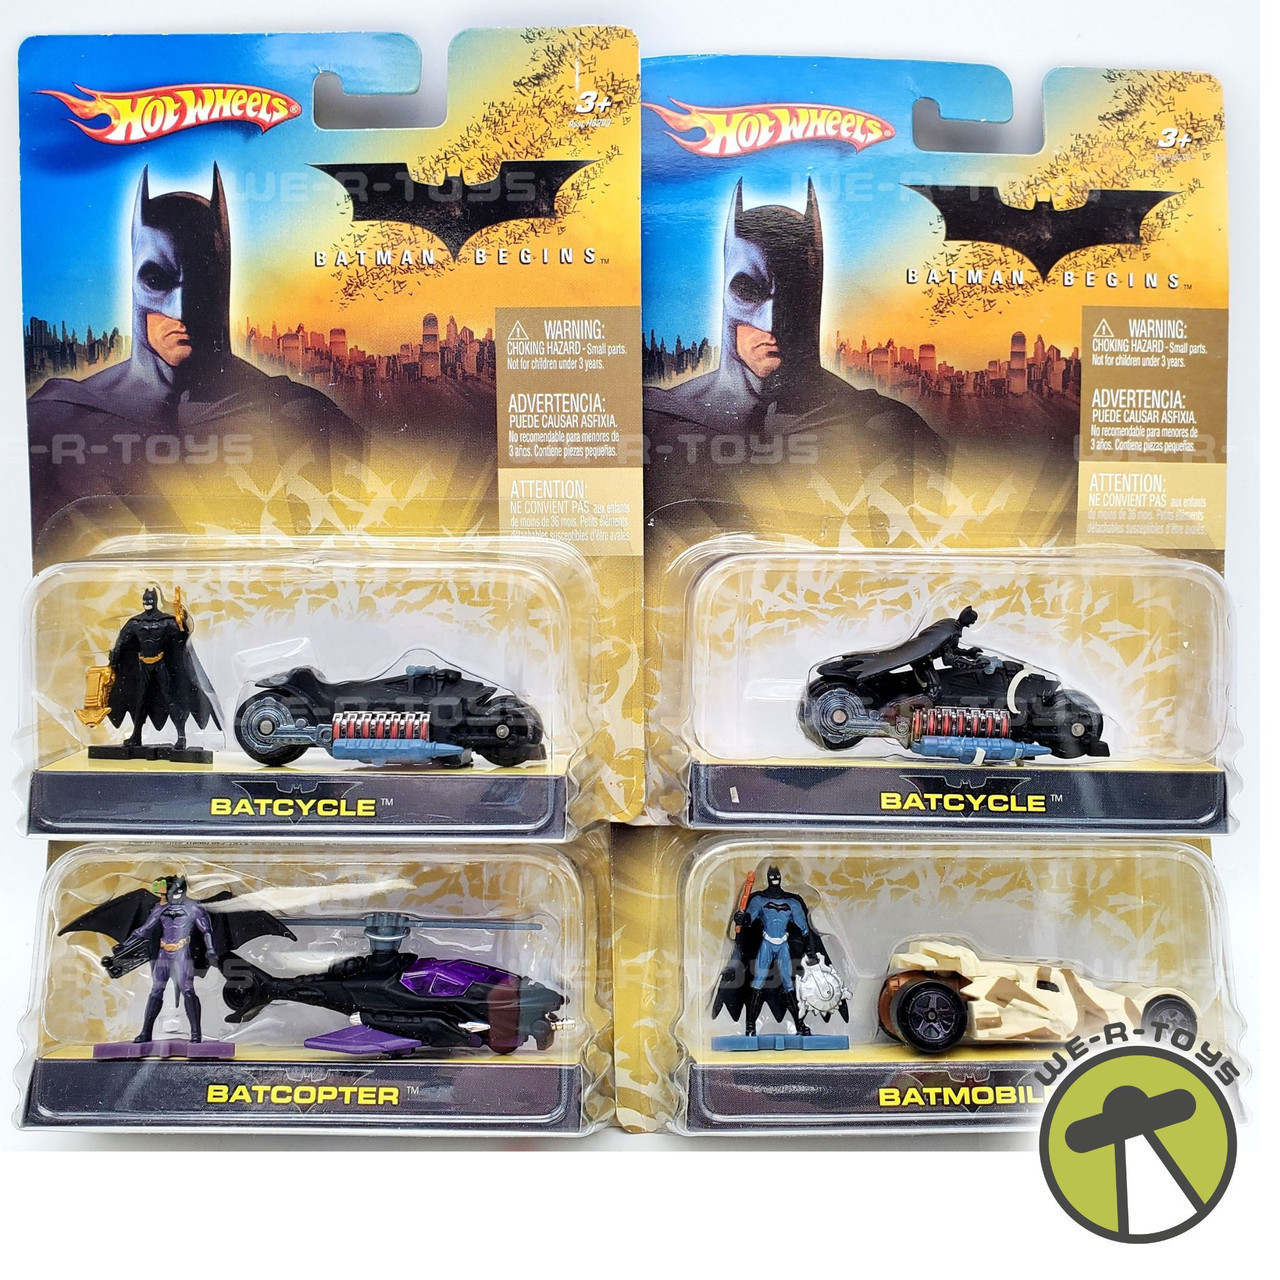 DC Comics, The Batman Batmobile Remote Control Car with Official Batman  Movie Styling, Kids Toys for Boys and Girls Ages 4 and Up